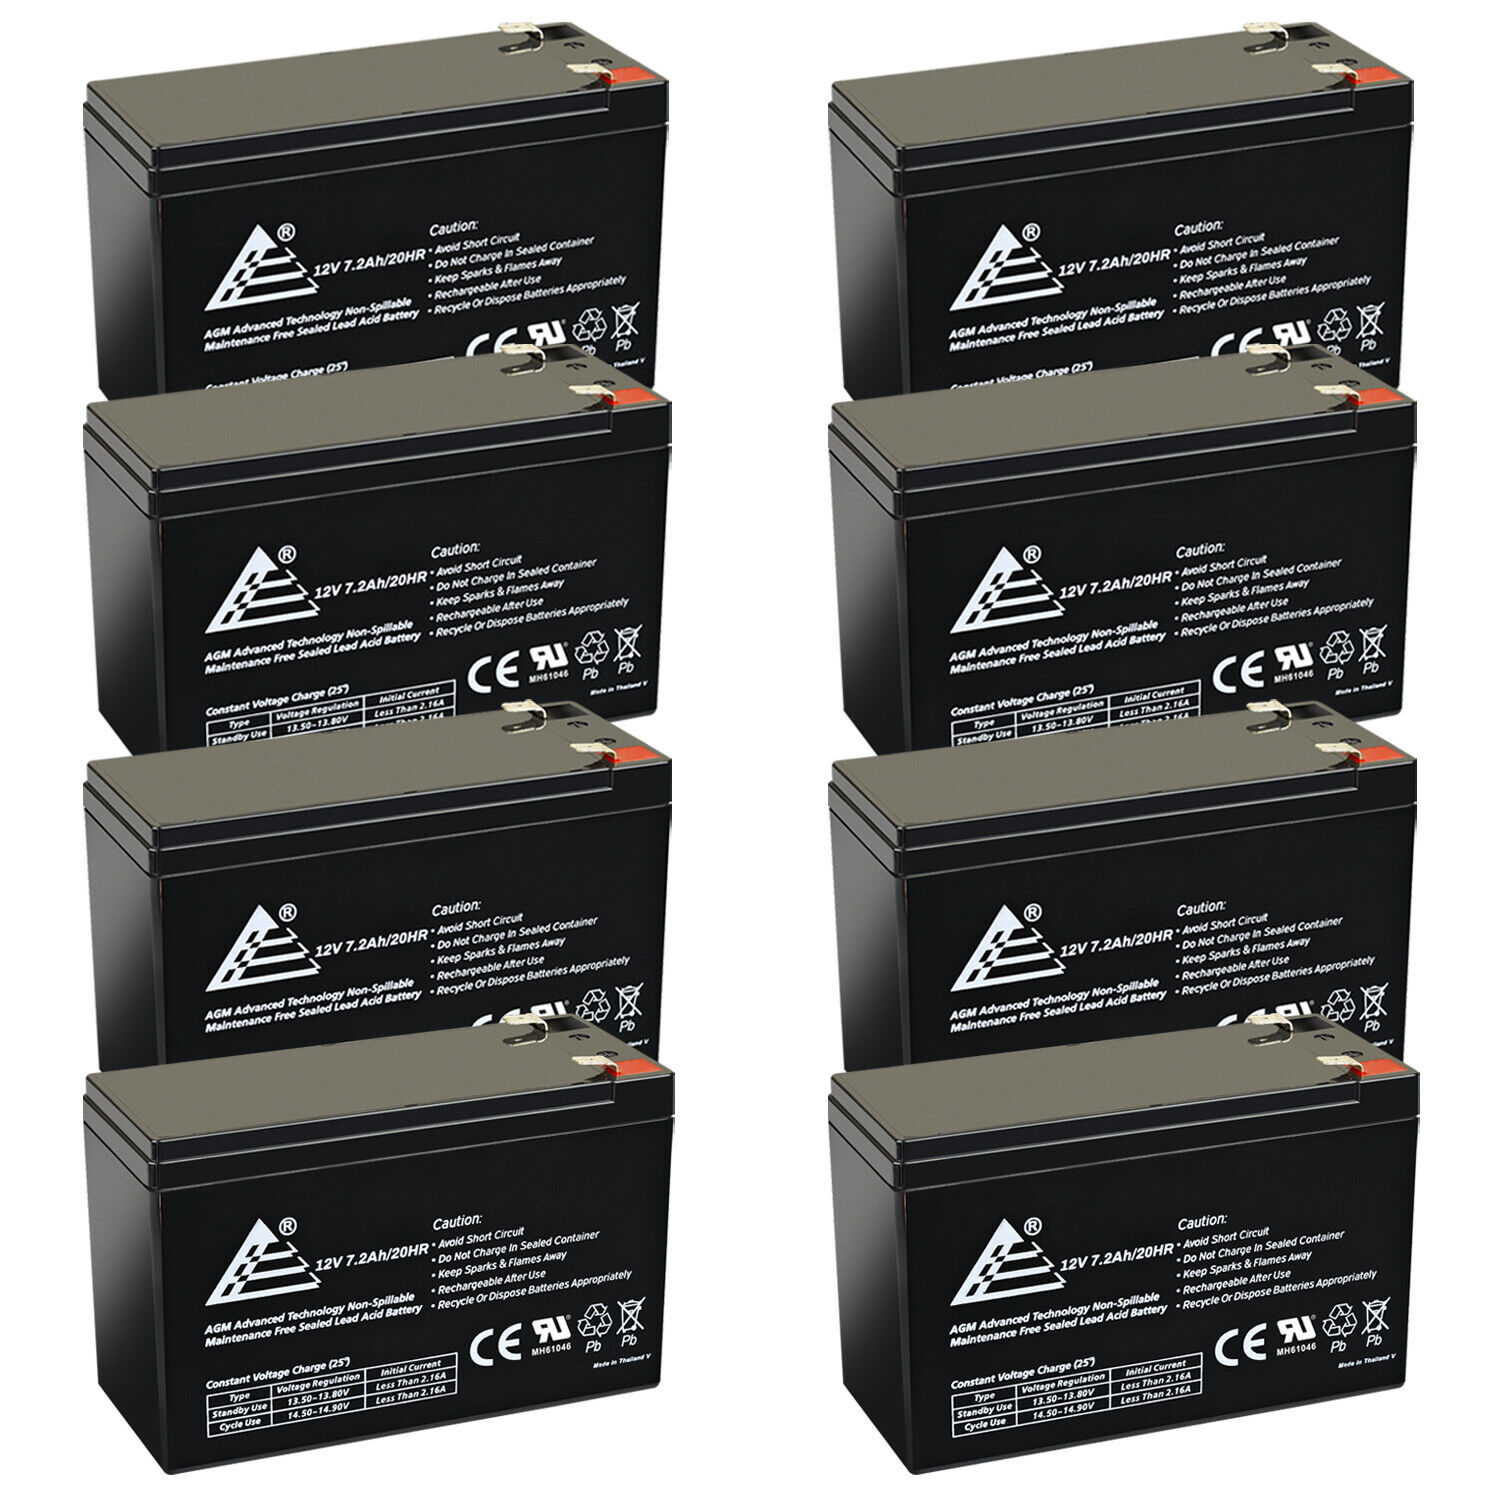 8 Pack: 12V 7.2Ah SLA Battery Replacement for Universal Alarm Control System 